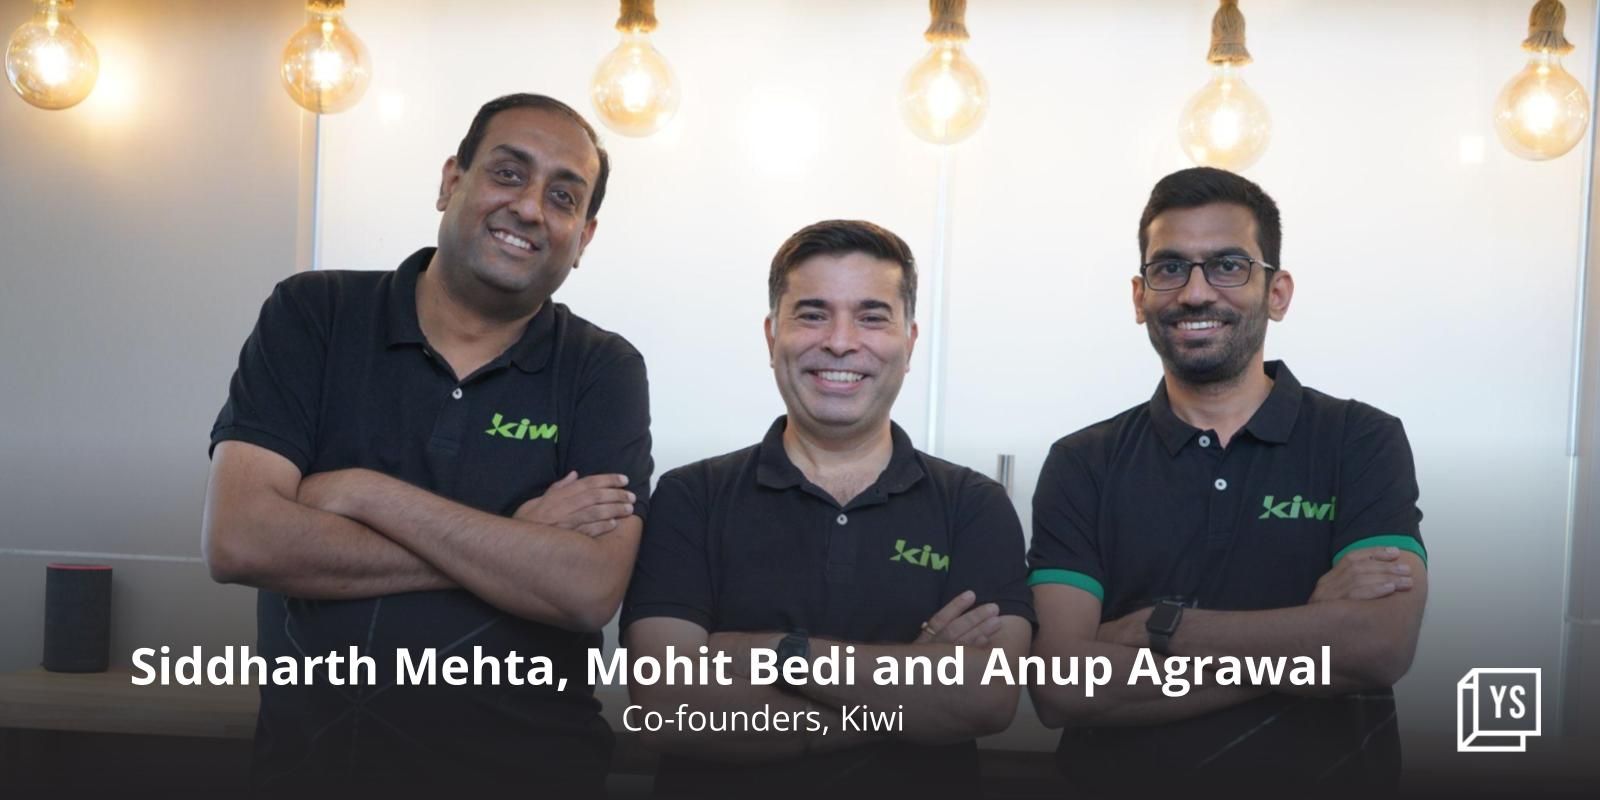 Fintech startup Kiwi raises $13M in a Series A round led by Omidyar Network India
